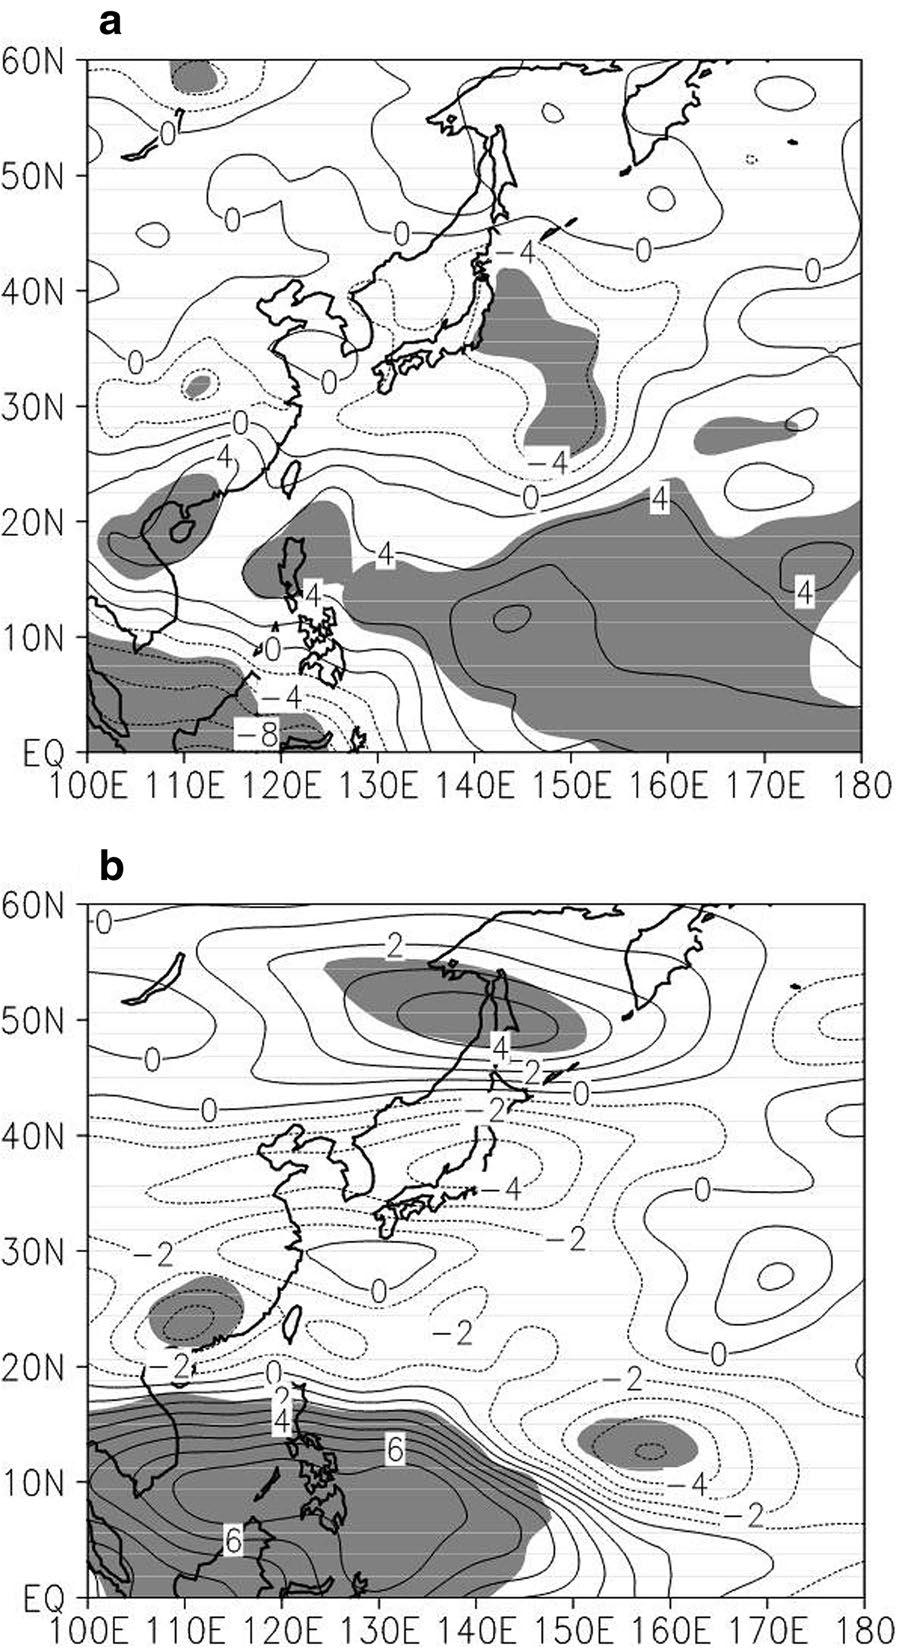 Contour intervals are 2% for 600 hpa relative humidity and 1 m s 1 for vertical wind shear between 200 and 850 hpa.